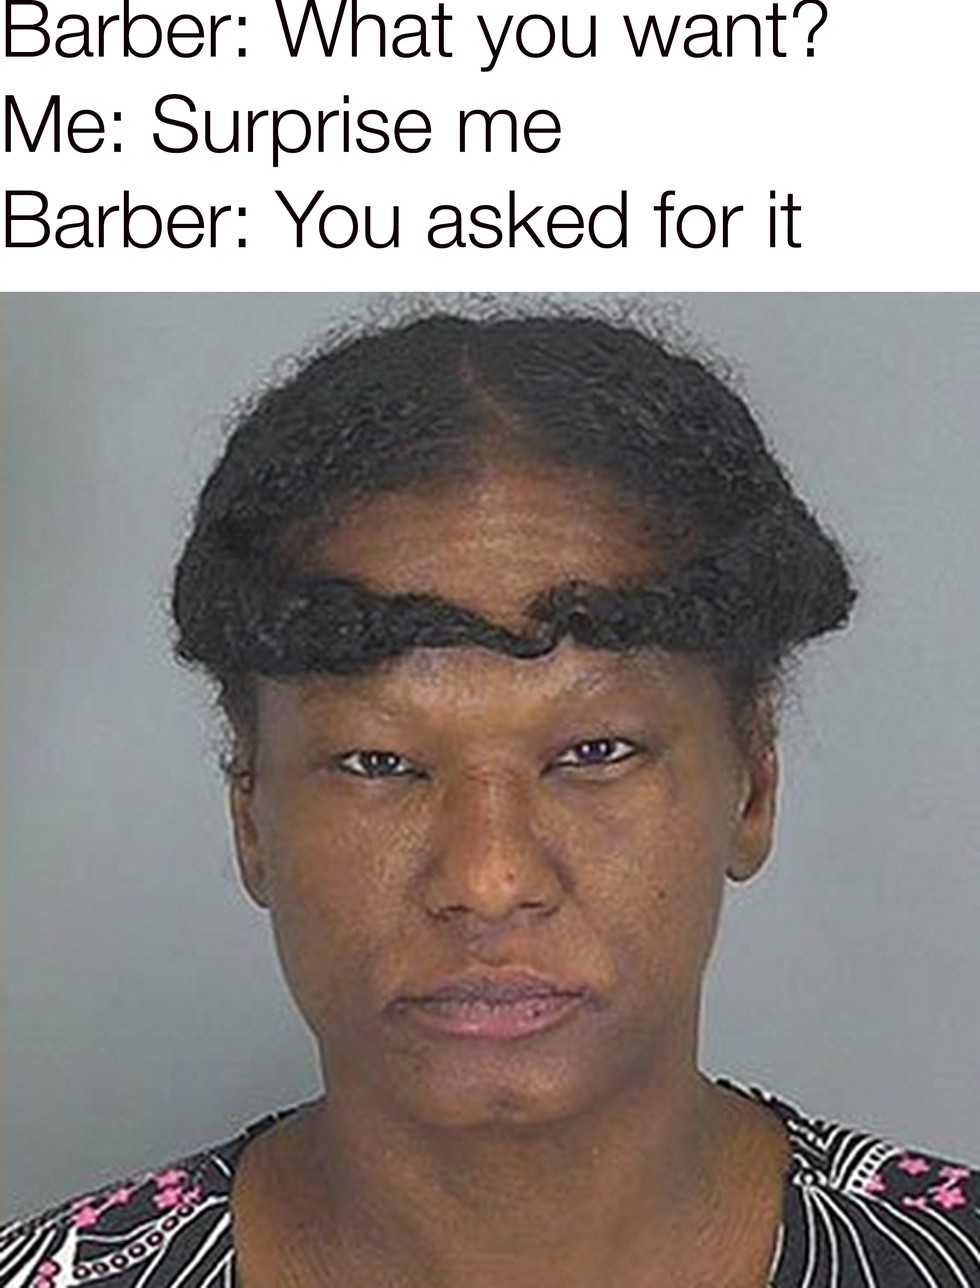 messed up haircuts - Barber What you want? 